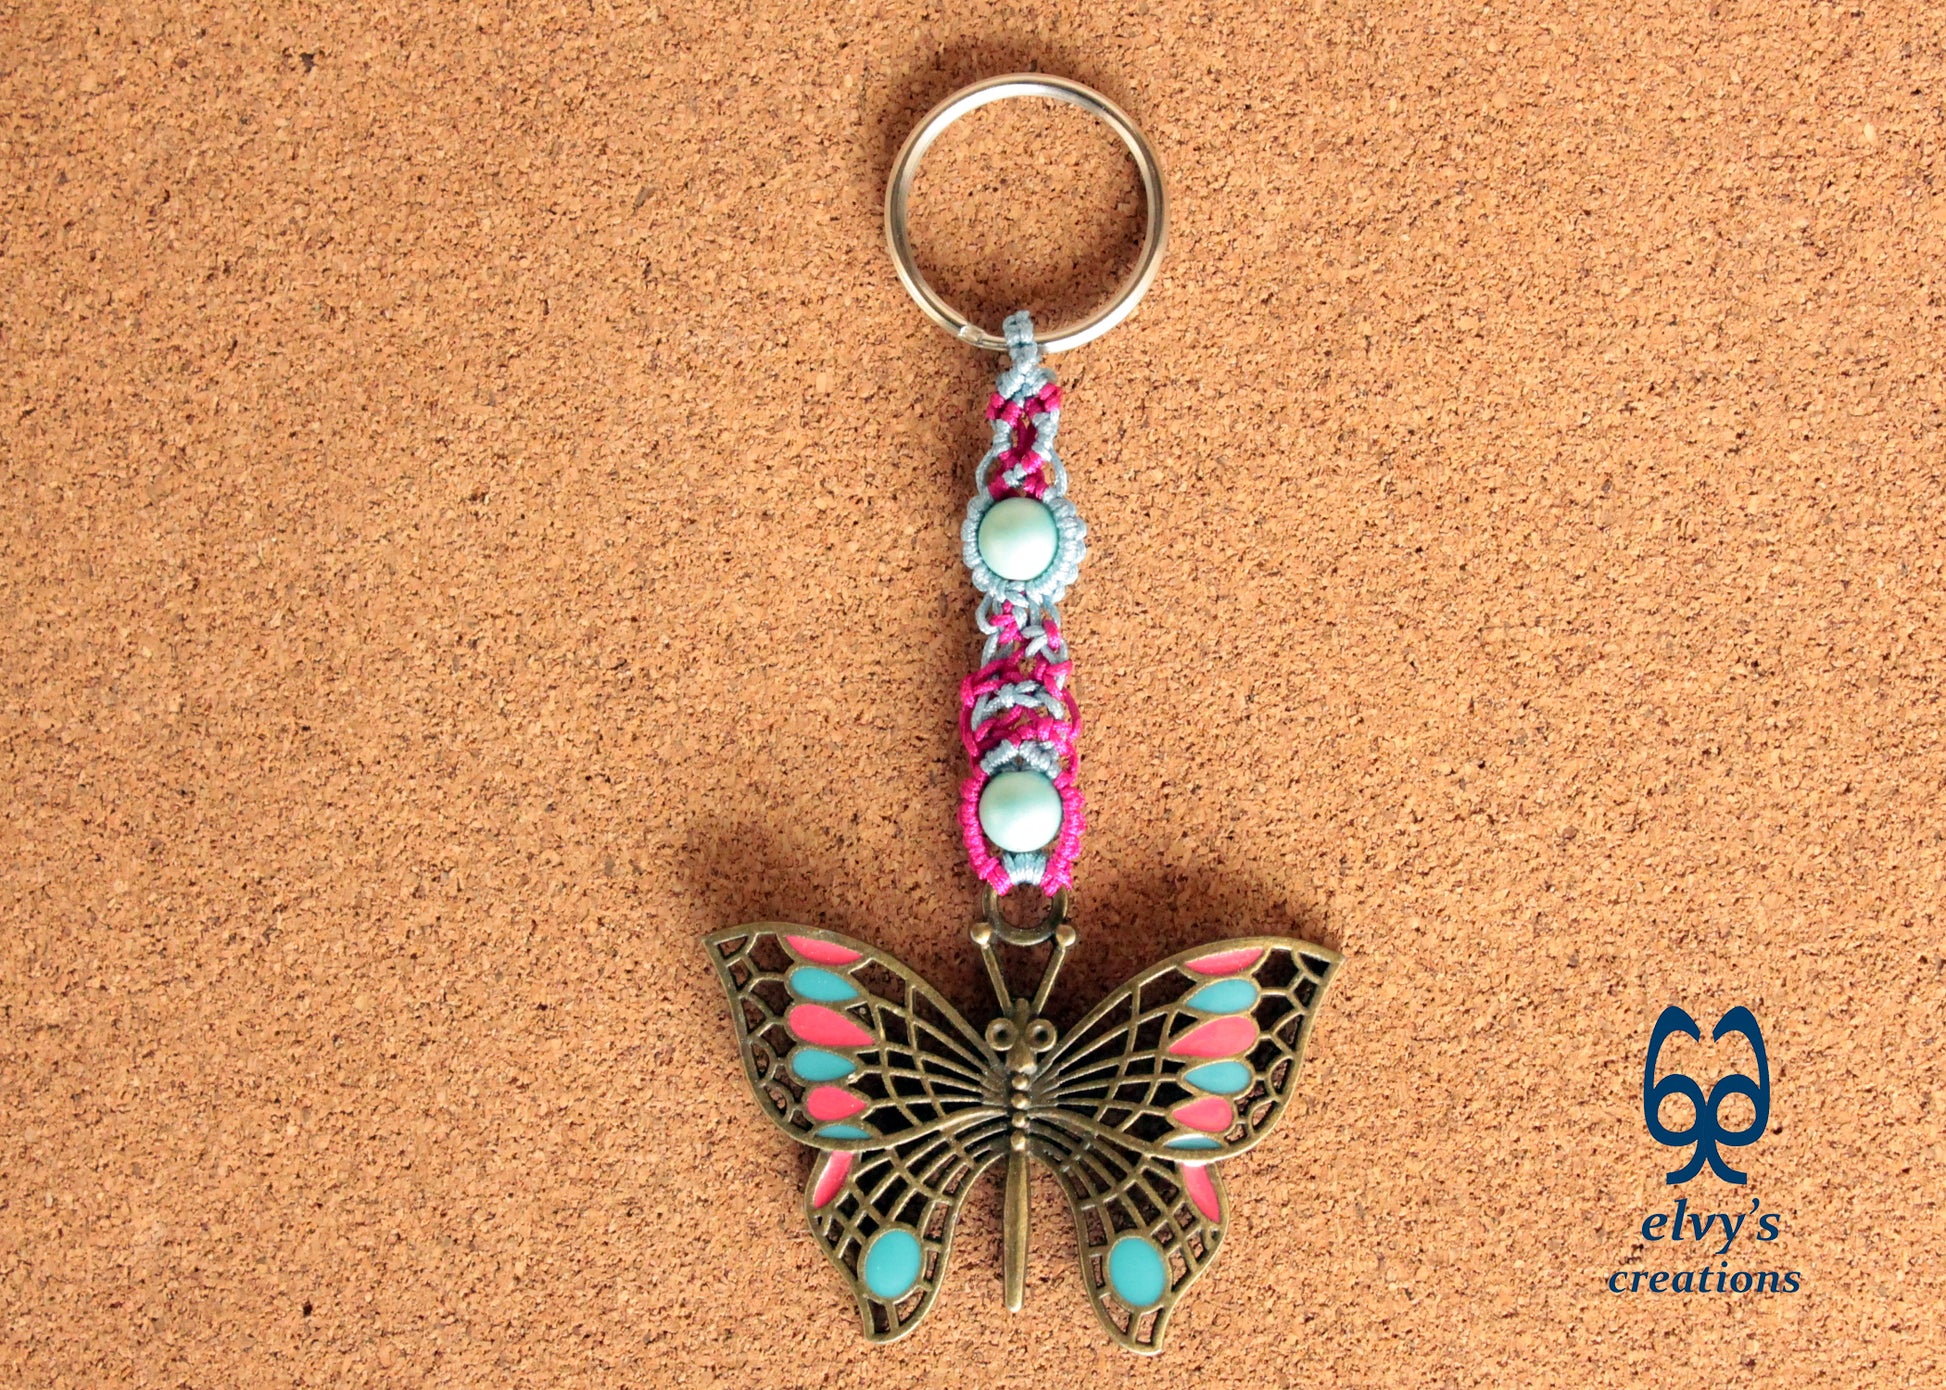 Handmade Macrame Key Chain, Butterfly Key Chain, Housewarming Gift, Small Gift for Woman and Man